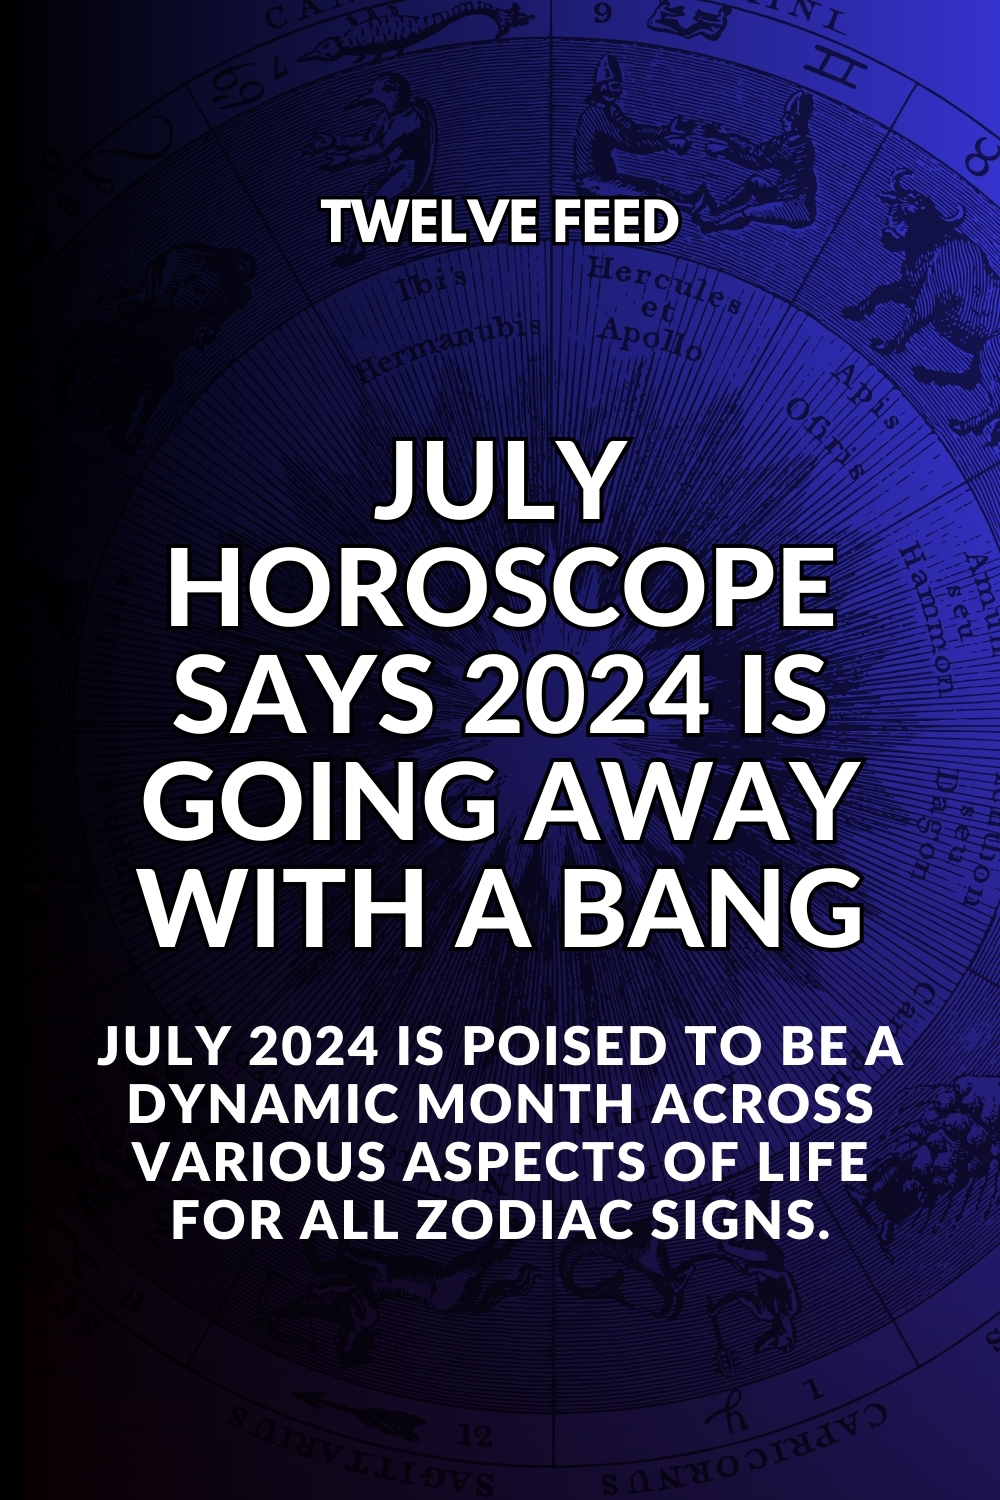 July Horoscope Says 2024 Is Going Away With A Bang